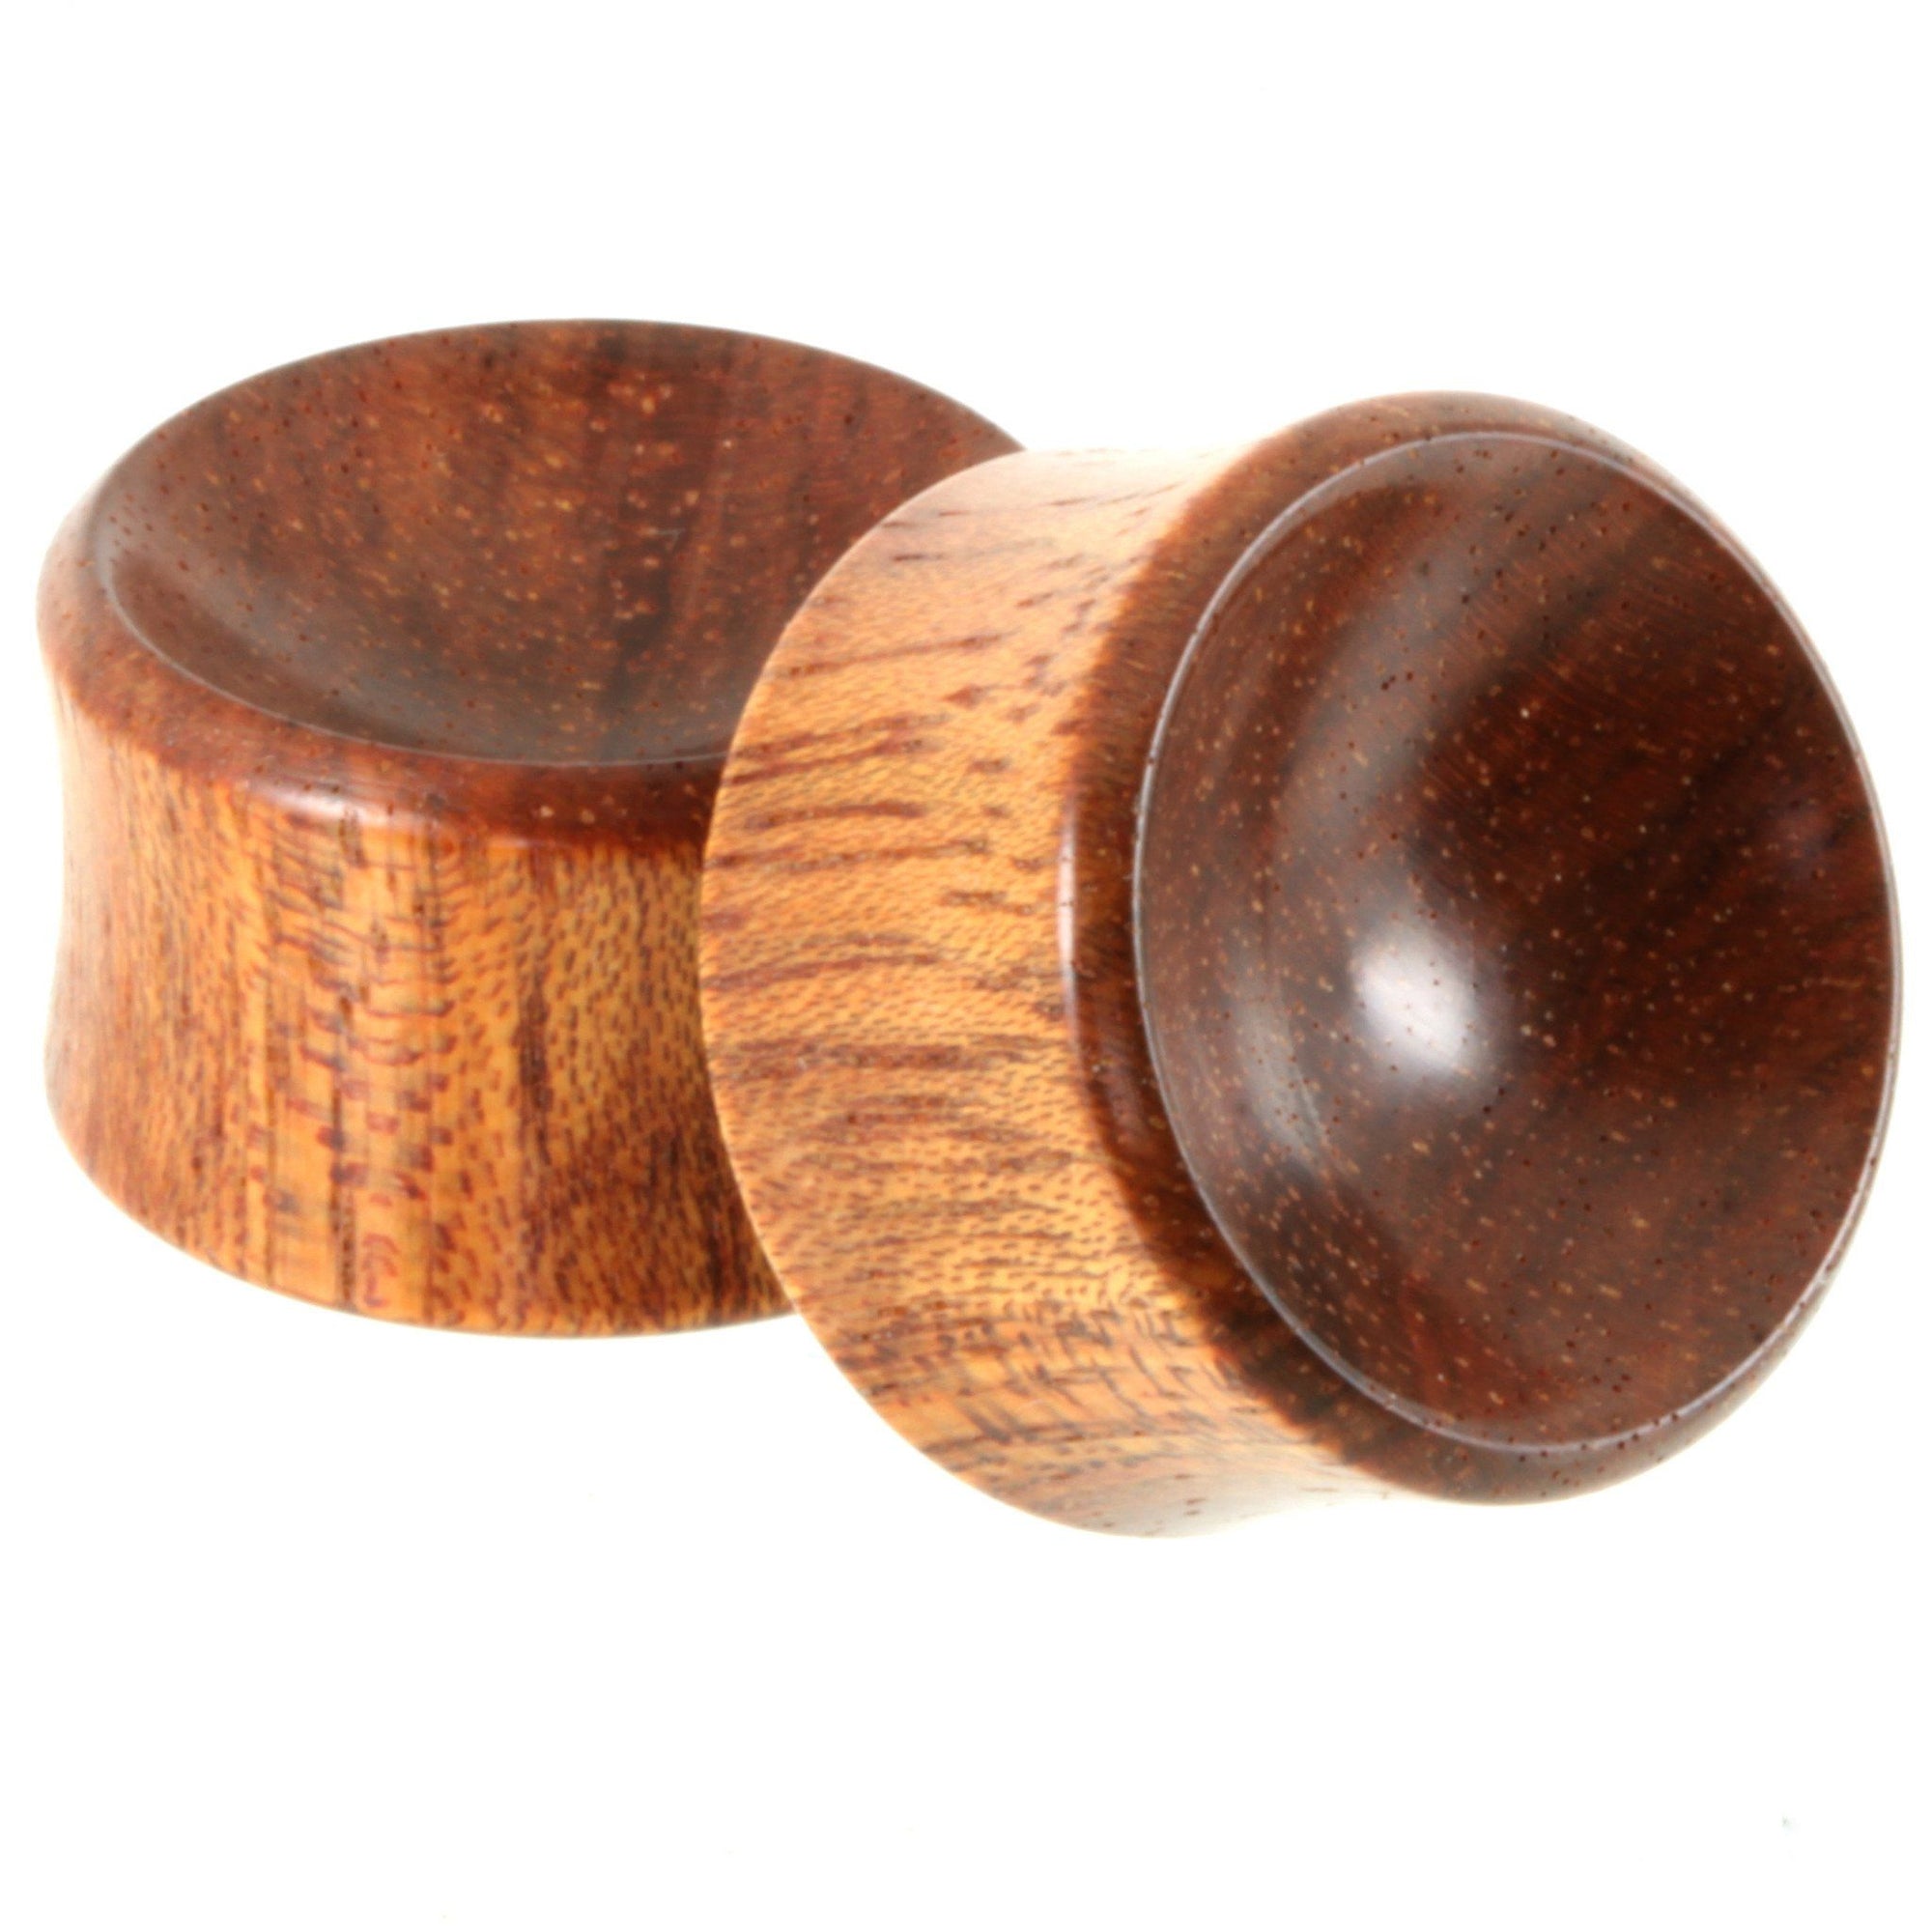 Bloodwood Bowl Plugs, jewellery, body jewellery. - Southshore Adornments 